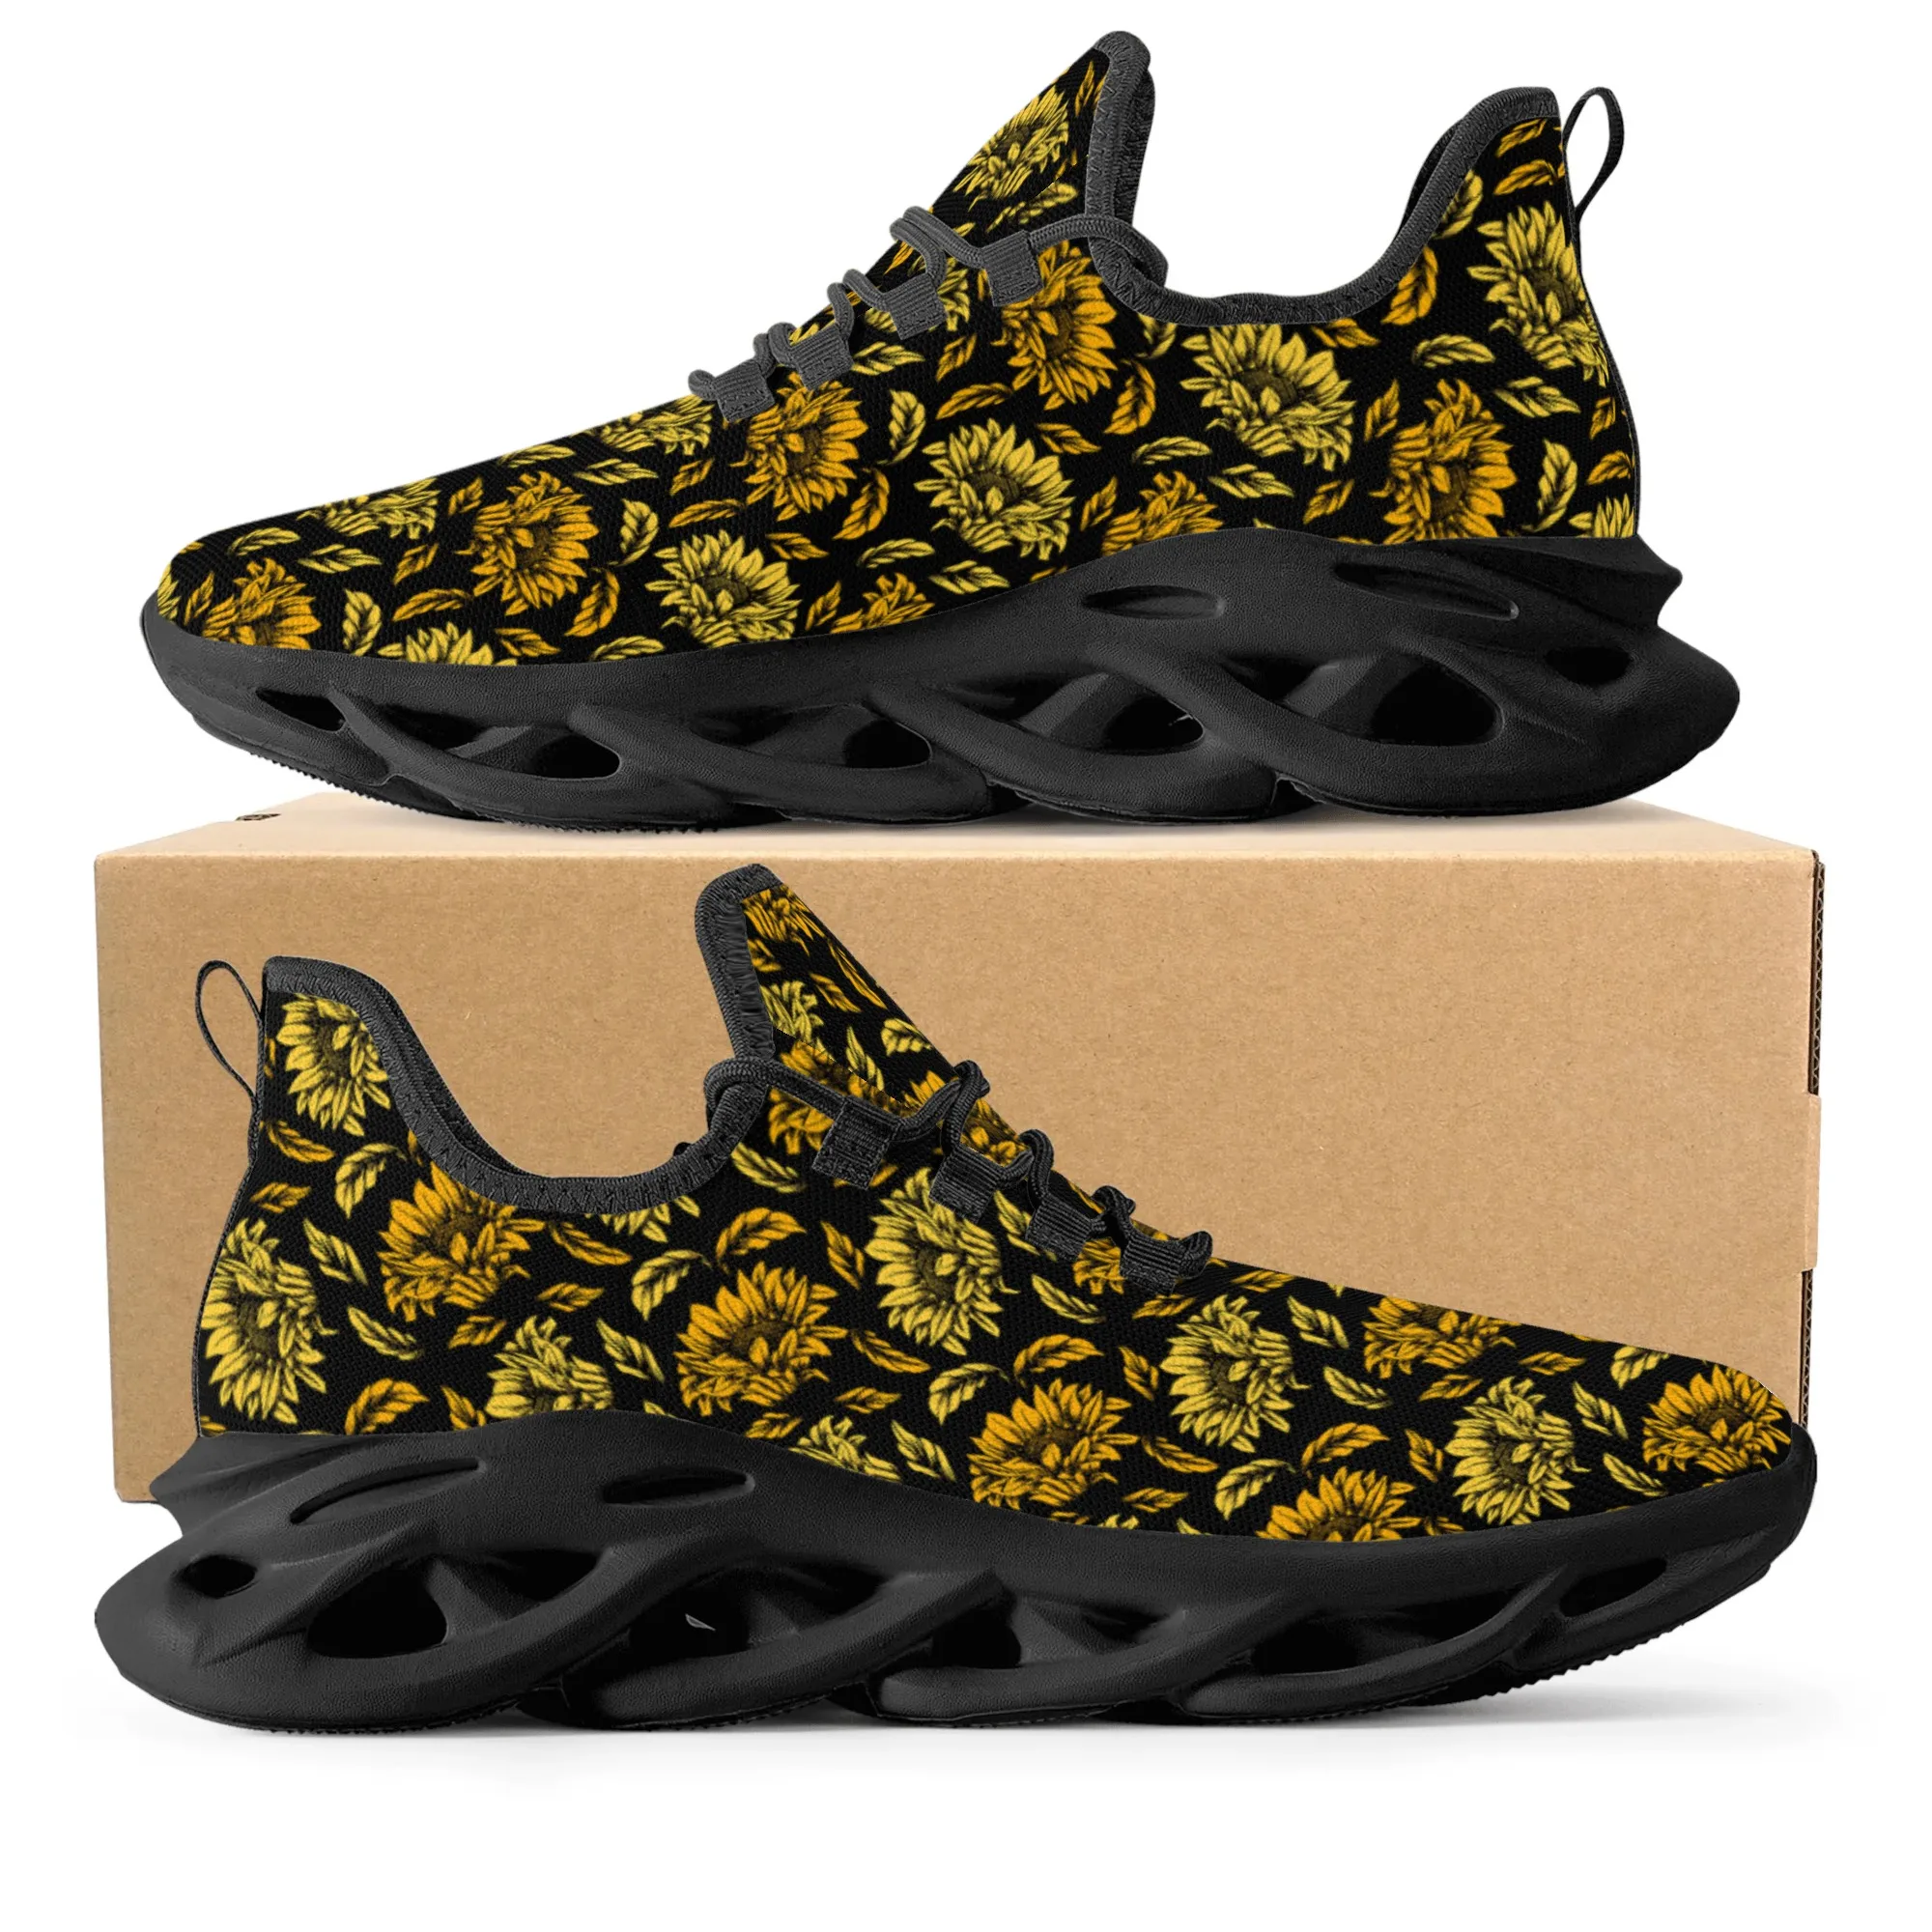 Sunflowers Print Design Fashion Funny Sneakers Men Women Teenager Breathable Mesh Casual Running Shoes Lace-Up Basketball Shoe men professional high top basketball shoes men s cushioning light basketball sneakers women mesh breathable outdoor sports shoes